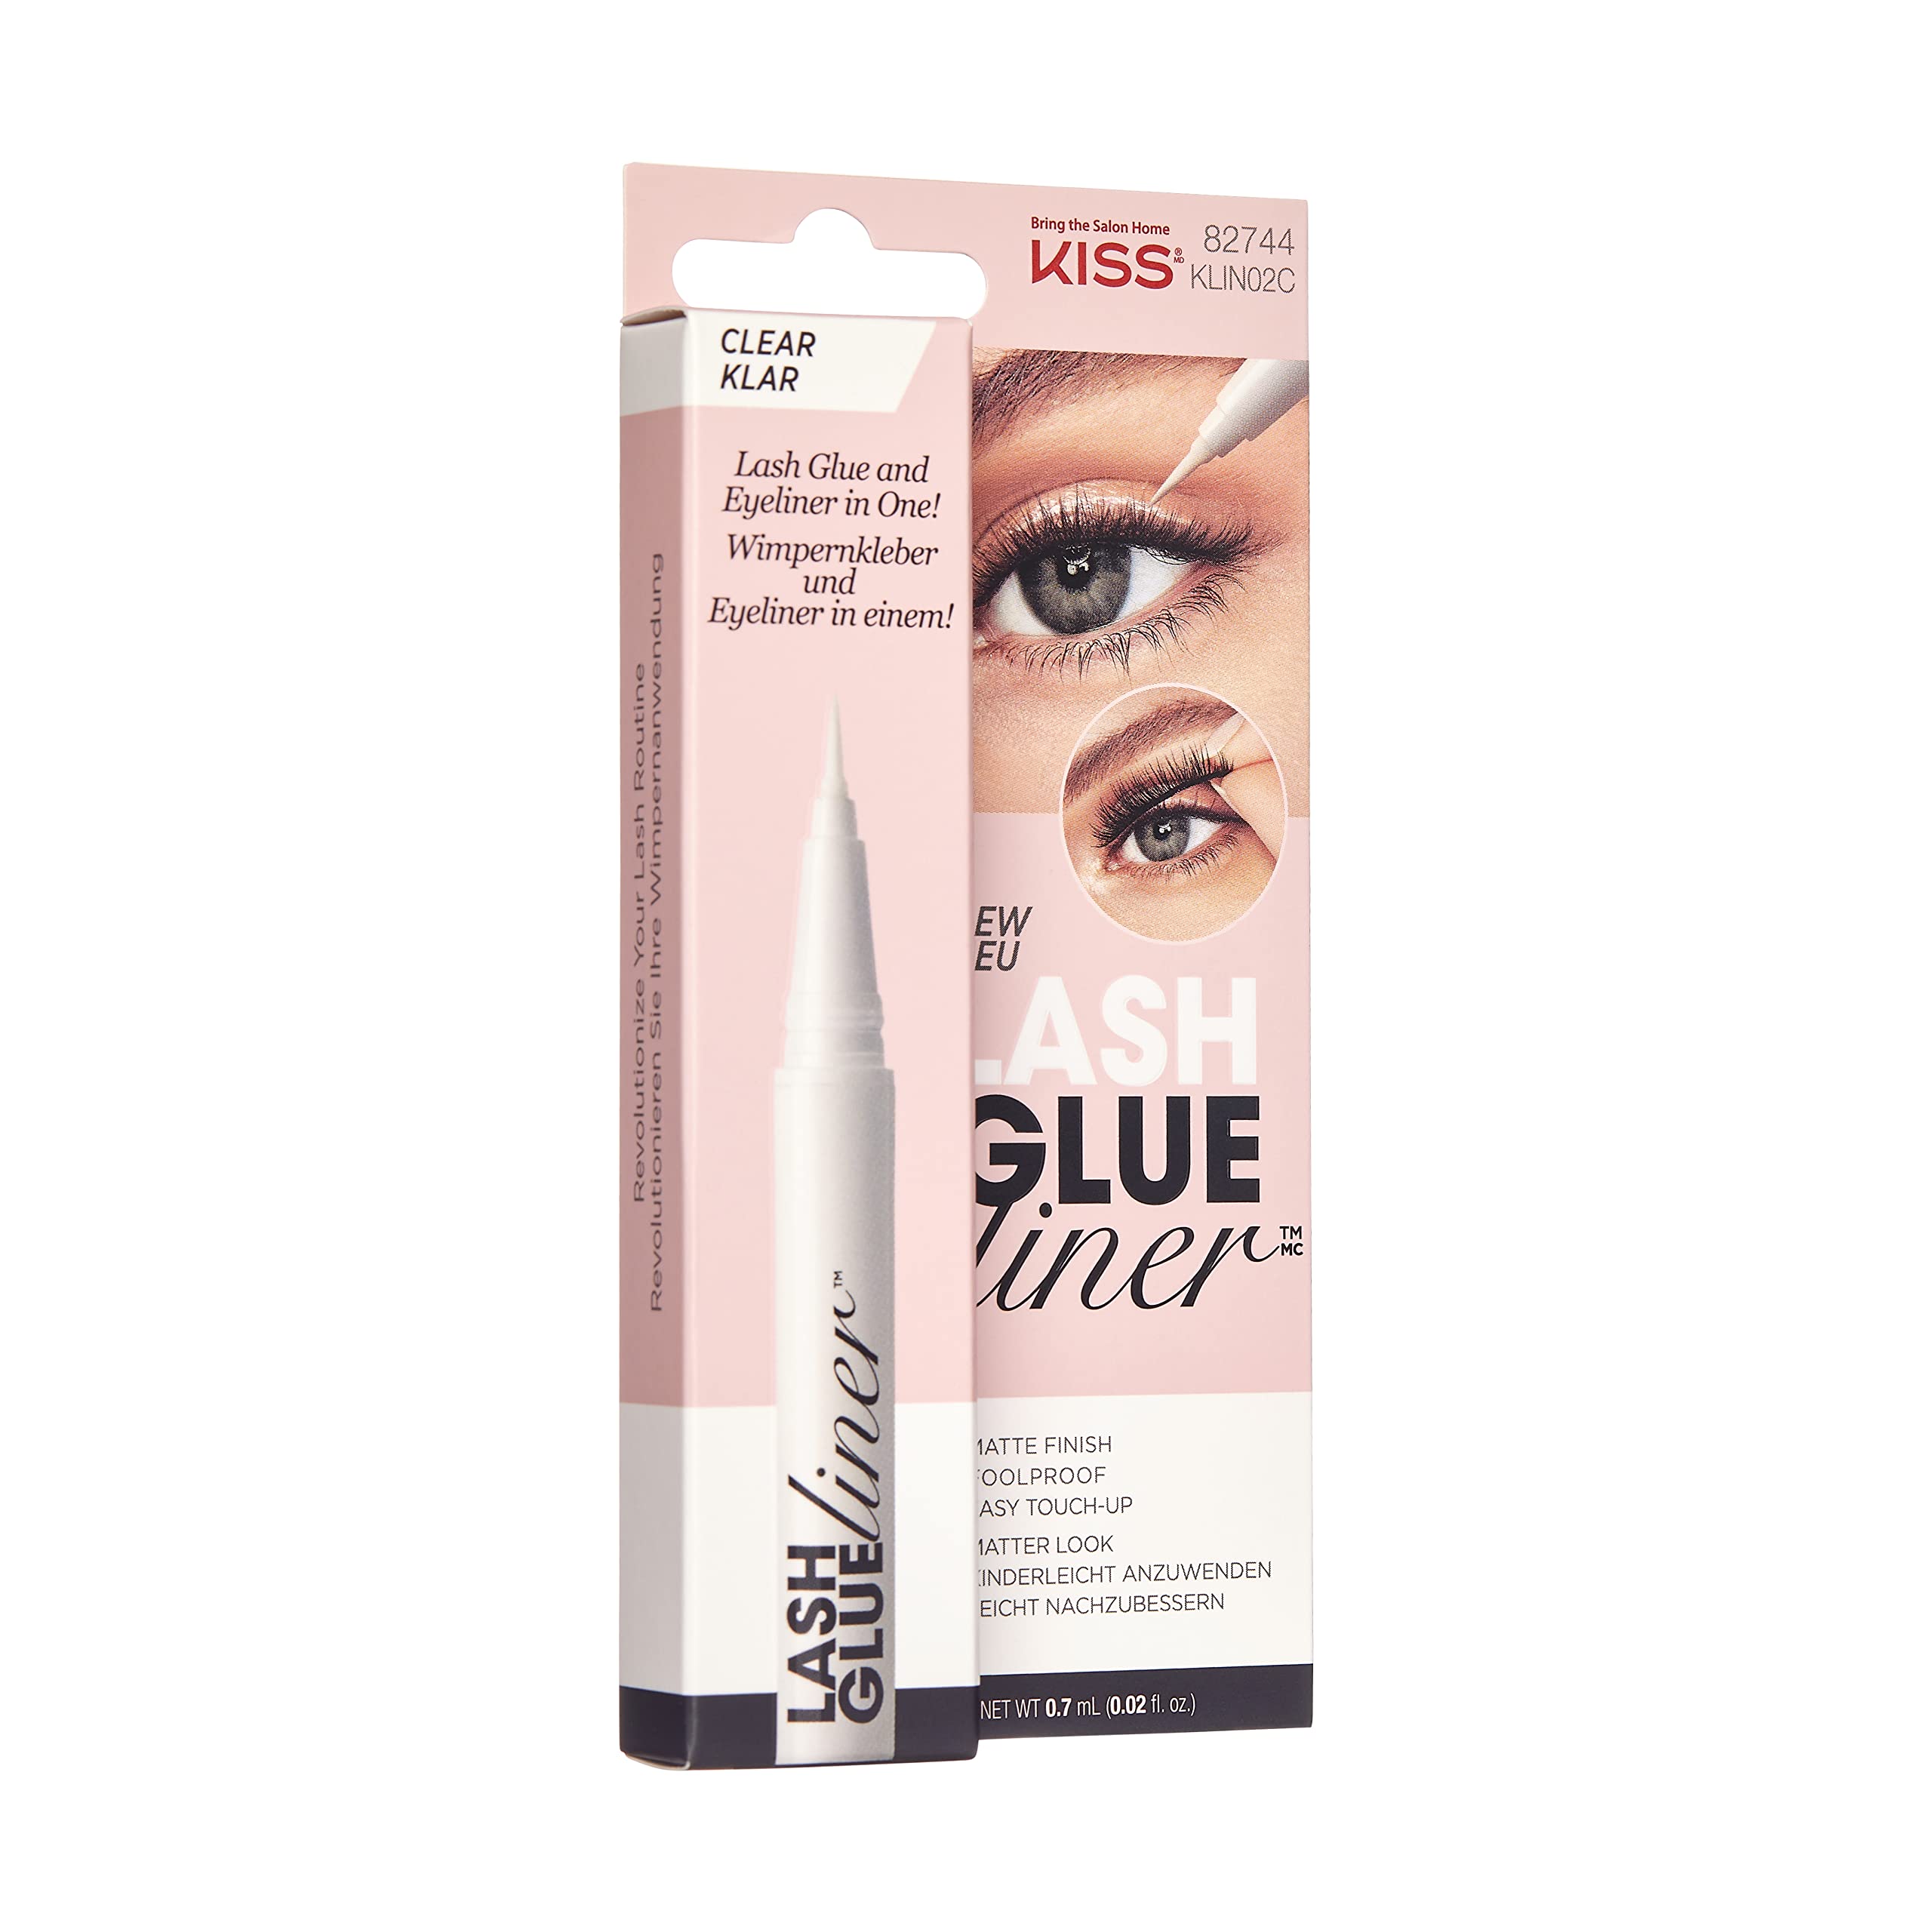 KISS Clear Lash GLUEliner, Felt-Tip Eyelash Adhesive, Clear Matte Finish, Foolproof Application, Easy Touch-Up, 0.02 Oz.